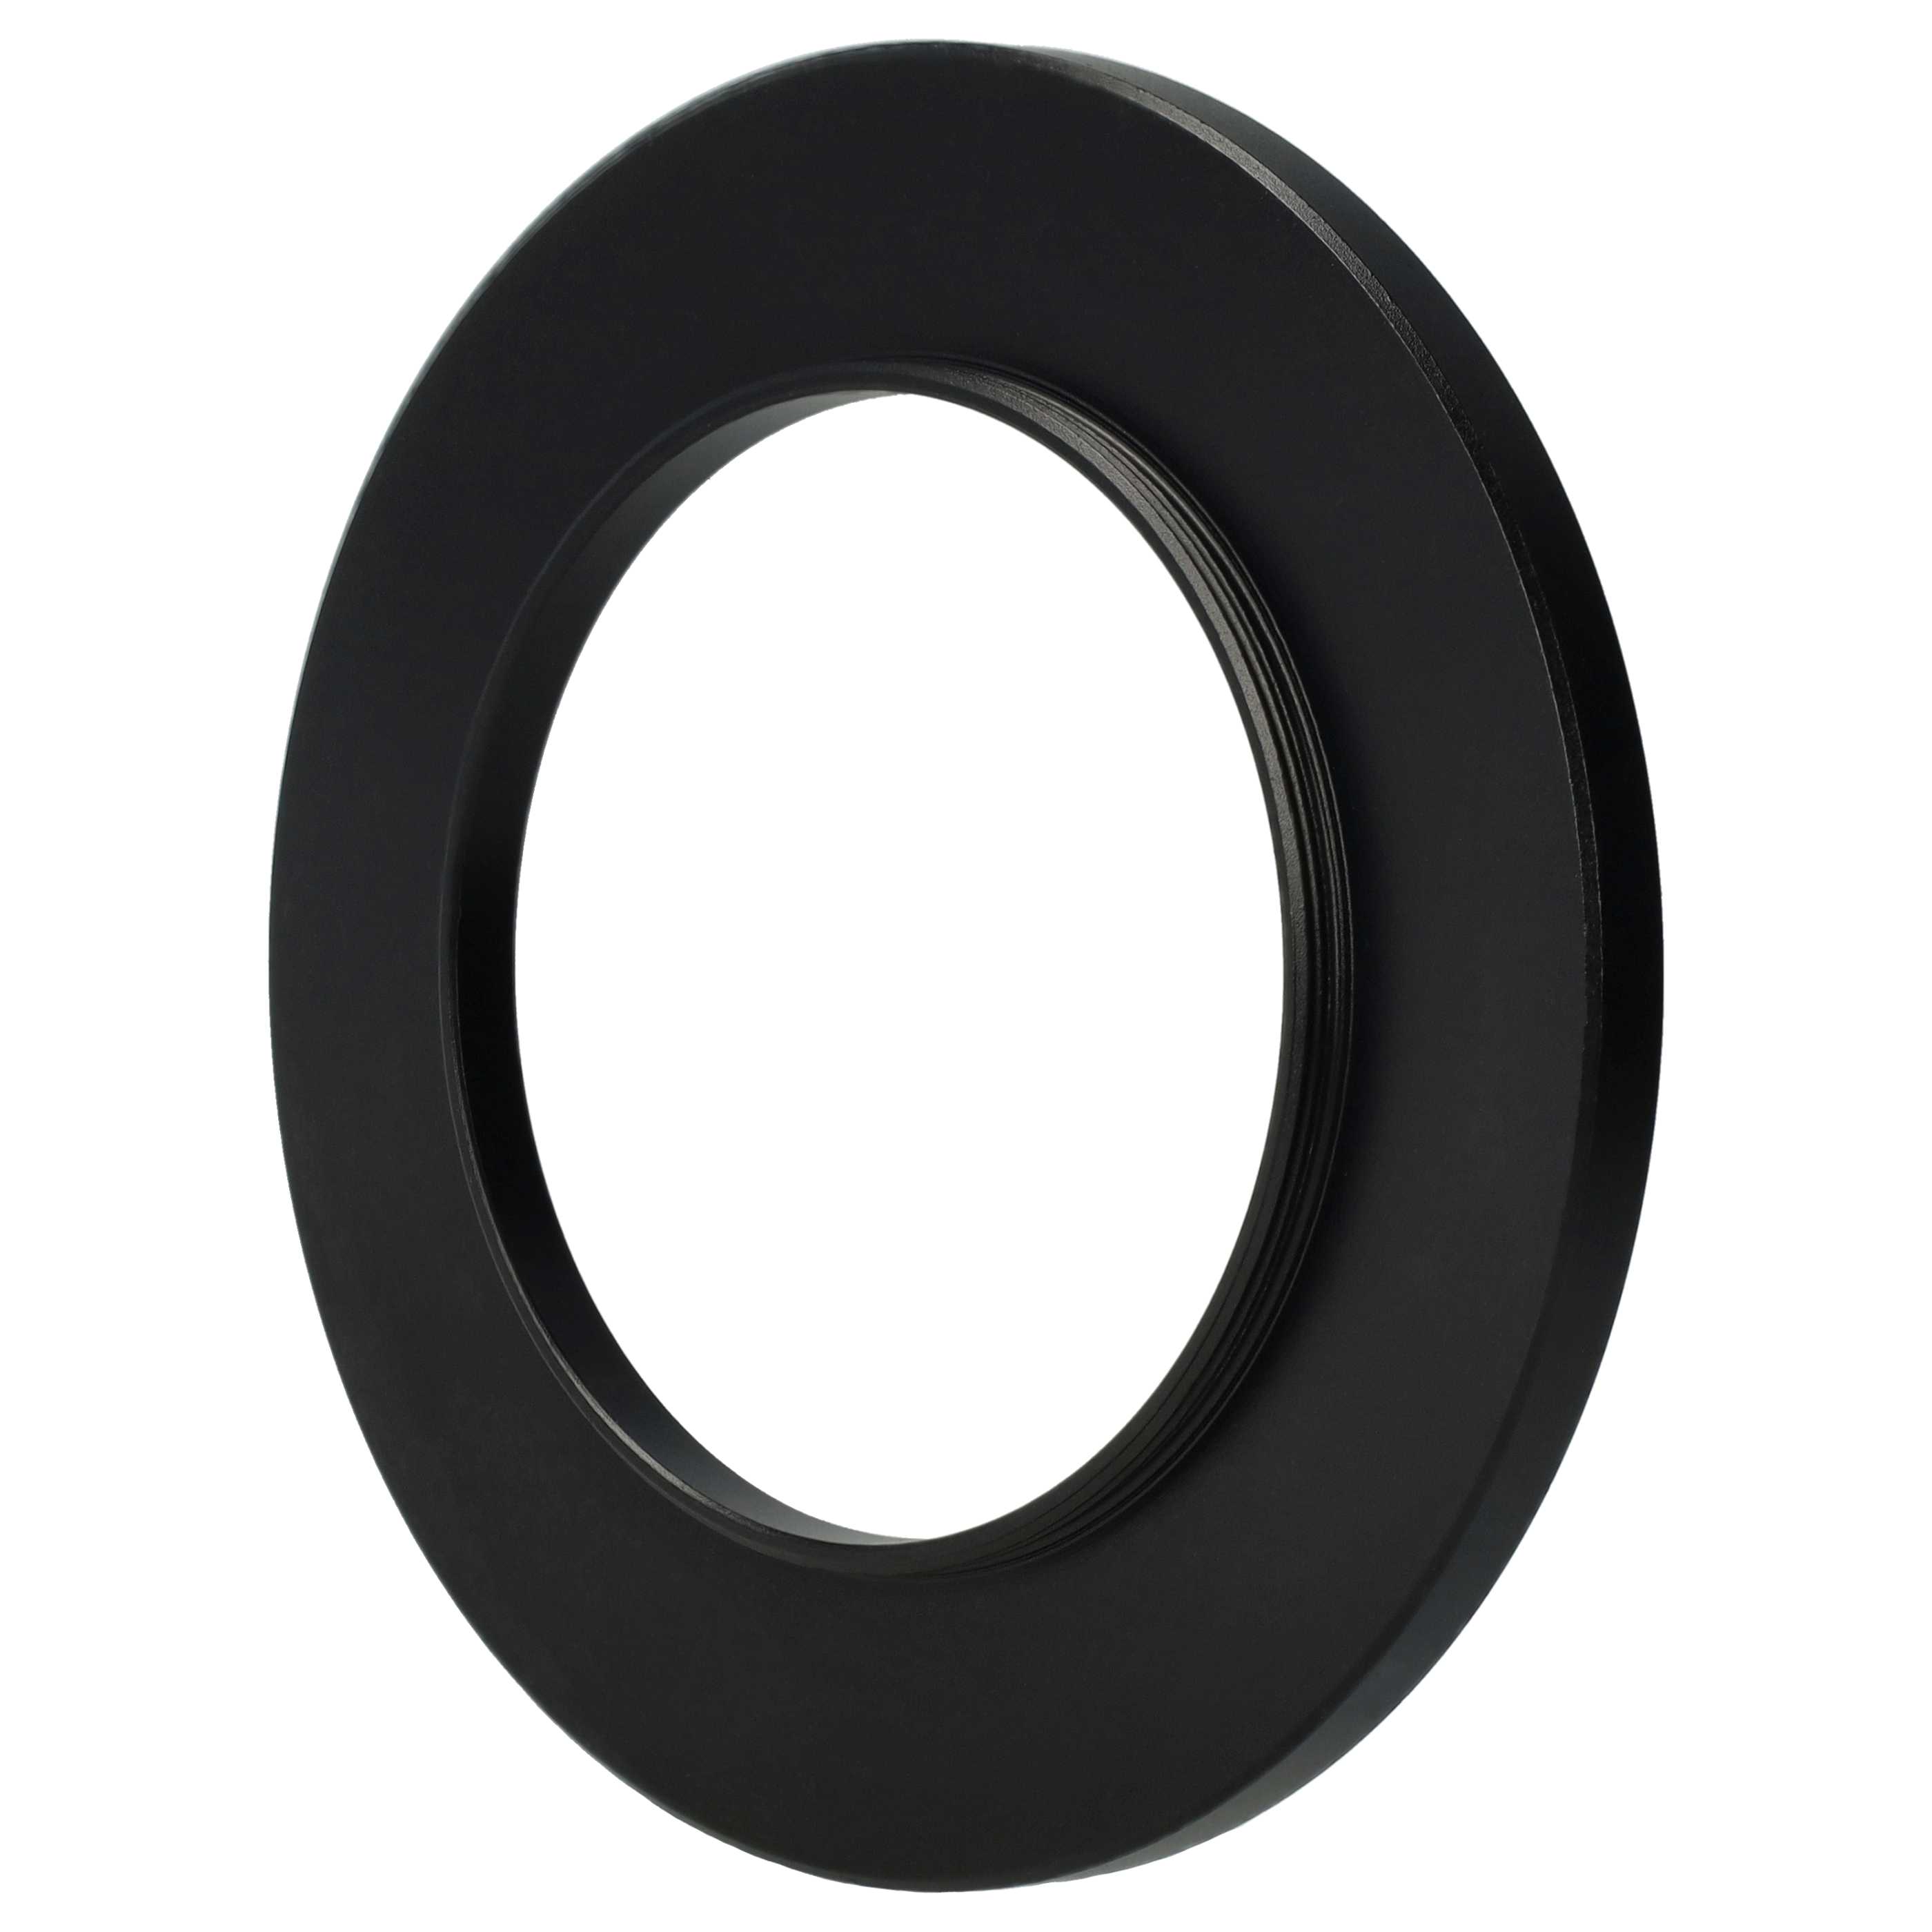 Step-Up Ring Adapter of 49 mm to 72 mmfor various Camera Lens - Filter Adapter